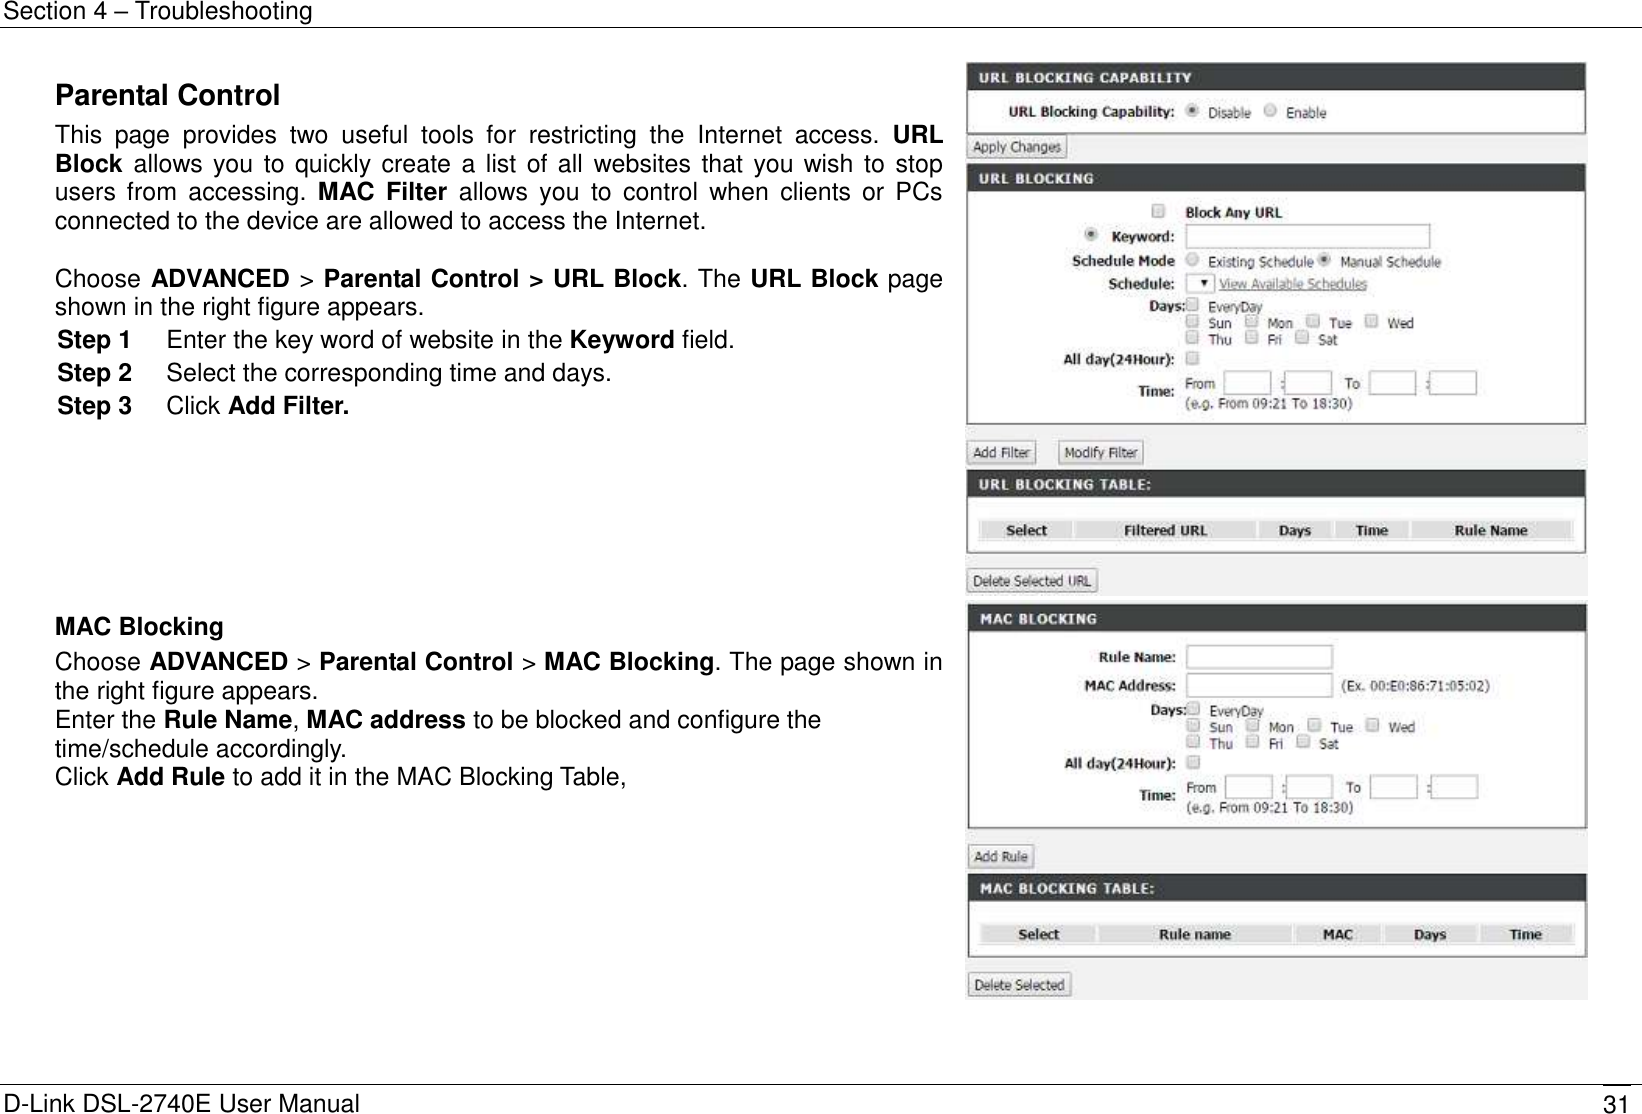 Section 4 – Troubleshooting D-Link DSL-2740E User Manual 31 Parental Control This  page  provides  two  useful  tools  for  restricting  the  Internet  access.  URL Block allows you to quickly create a list of all  websites that you wish to stop users  from  accessing.  MAC  Filter  allows  you  to  control  when  clients  or  PCs connected to the device are allowed to access the Internet.  Choose ADVANCED &gt; Parental Control &gt; URL Block. The URL Block page shown in the right figure appears. Step 1  Enter the key word of website in the Keyword field.   Step 2  Select the corresponding time and days. Step 3  Click Add Filter.   MAC Blocking Choose ADVANCED &gt; Parental Control &gt; MAC Blocking. The page shown in the right figure appears. Enter the Rule Name, MAC address to be blocked and configure the time/schedule accordingly. Click Add Rule to add it in the MAC Blocking Table,    